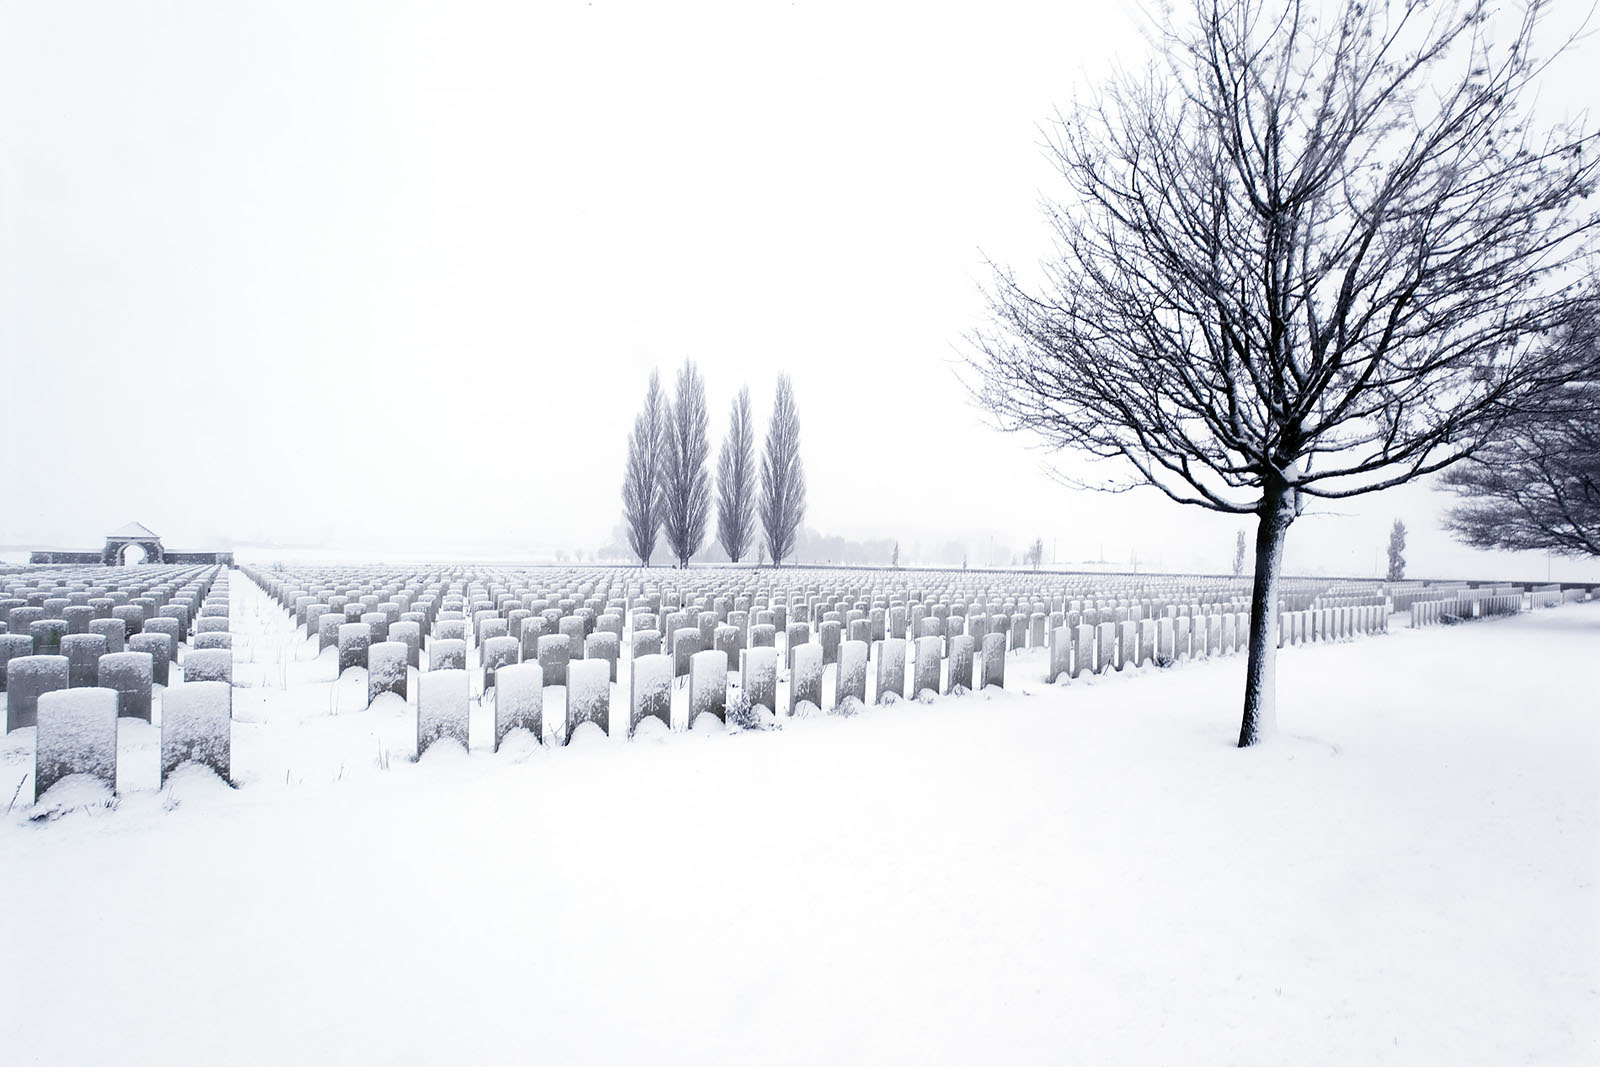 Modern photograph of a snowy field with a few trees scattered in it. Rows of rectangular grave markers stretch away into the distance.